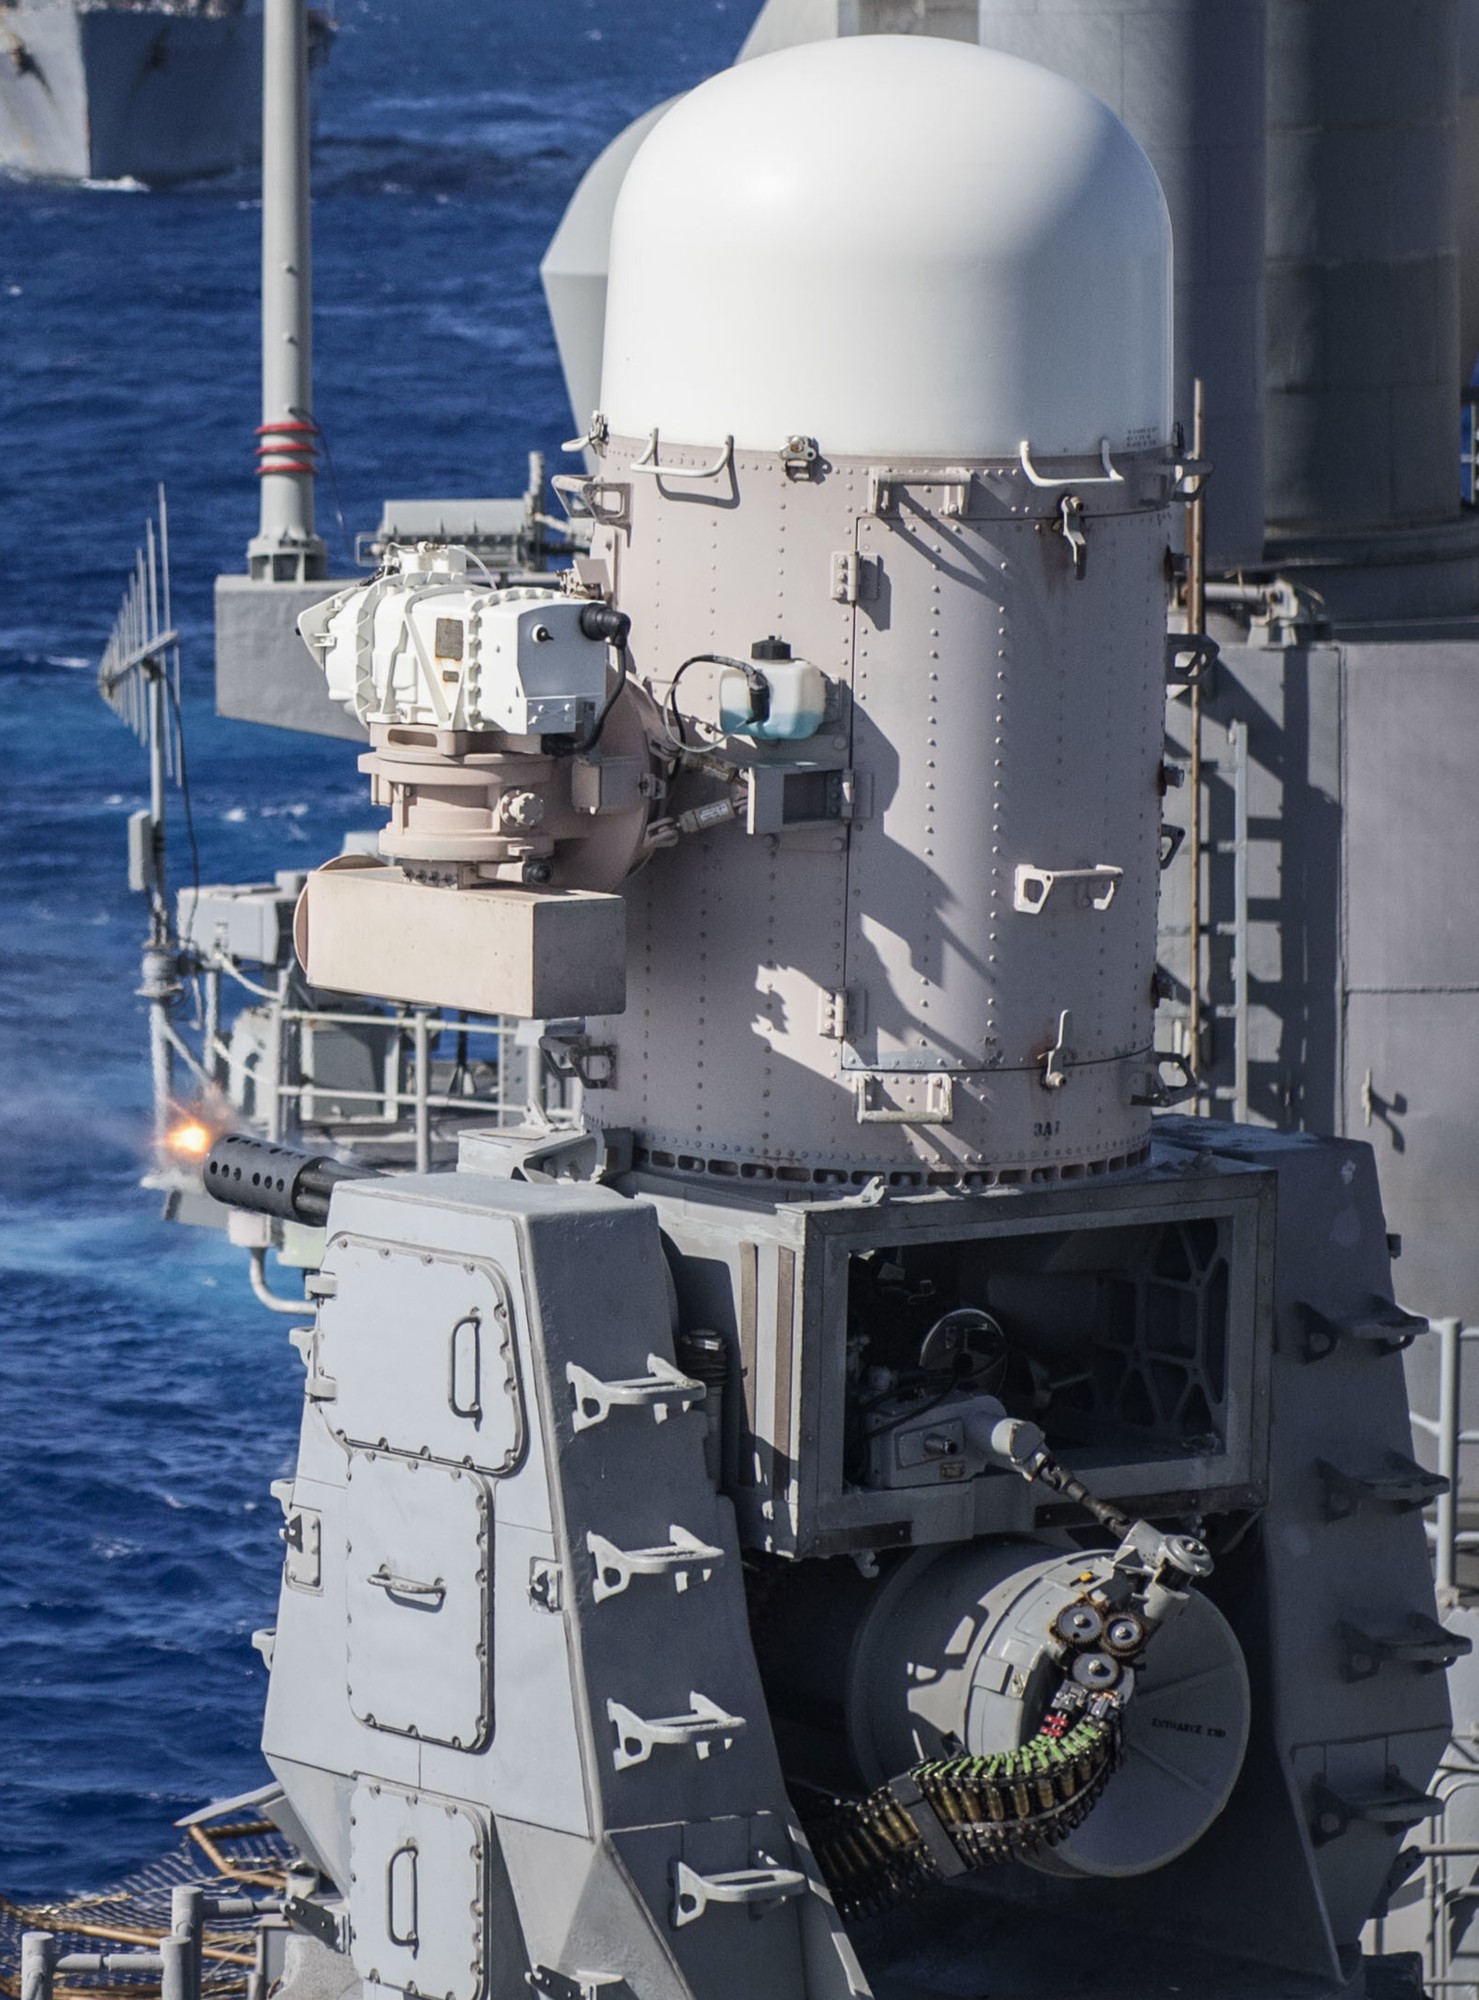 cg-62 uss chancellorsville ticonderoga class guided missile cruiser aegis us navy mk.15 phalanx close-in weapon system ciws 95